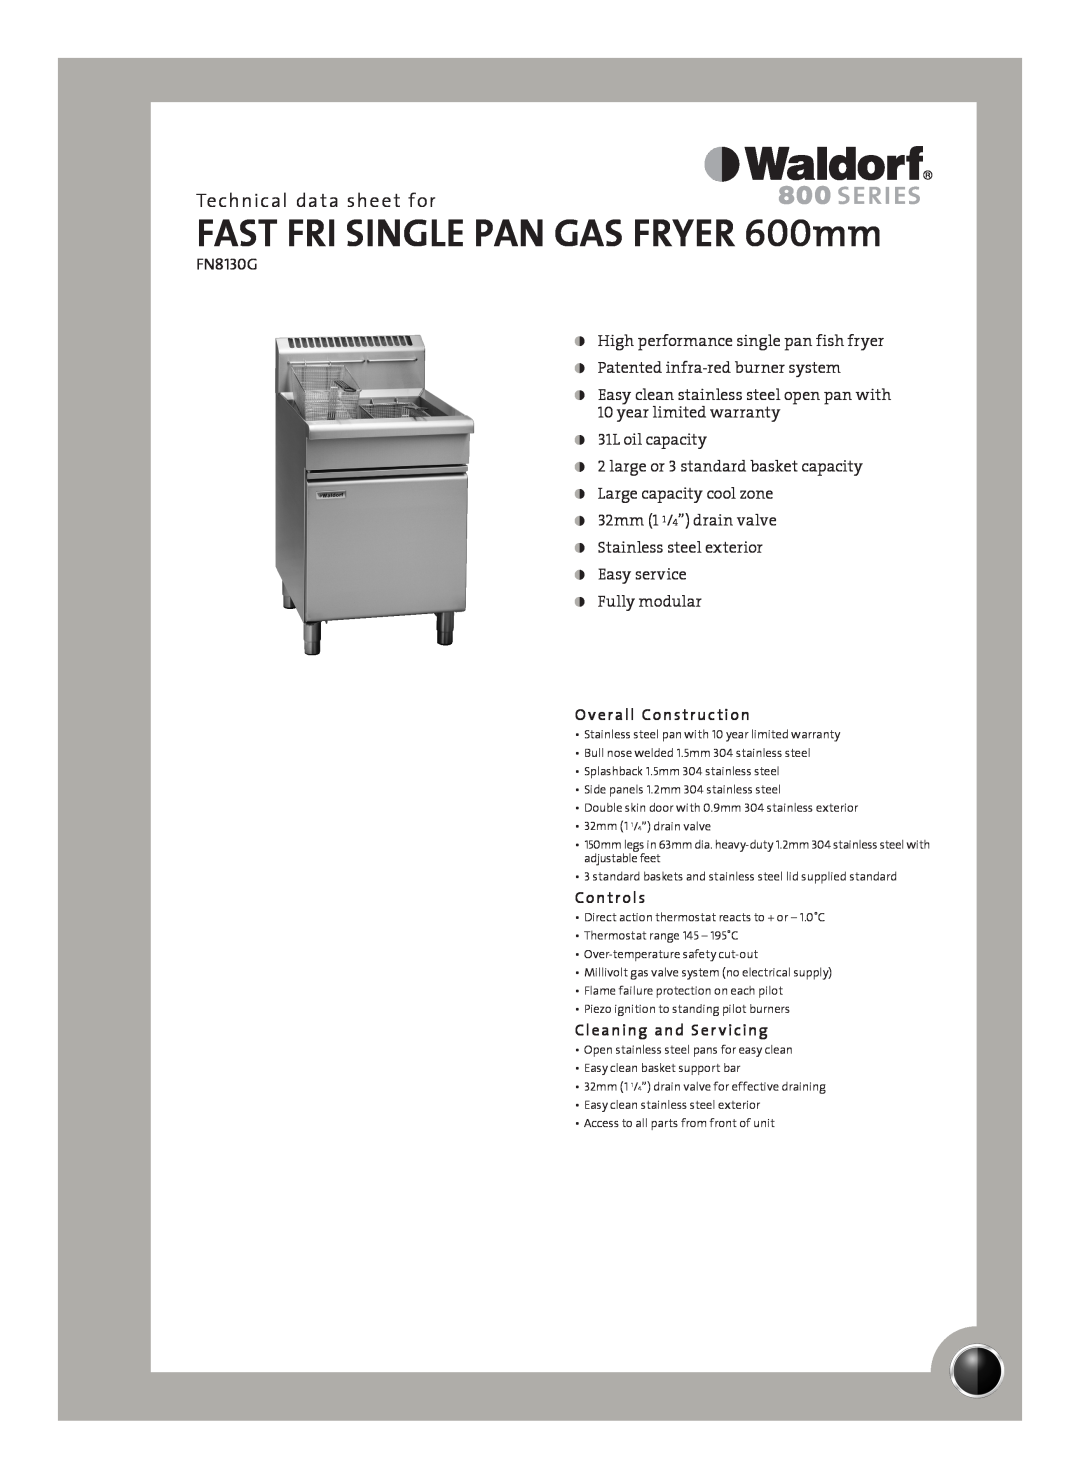 Moffat FN8130G warranty Technical data sheet for, Overall Construction, Controls, Cleaning and Ser vicing 